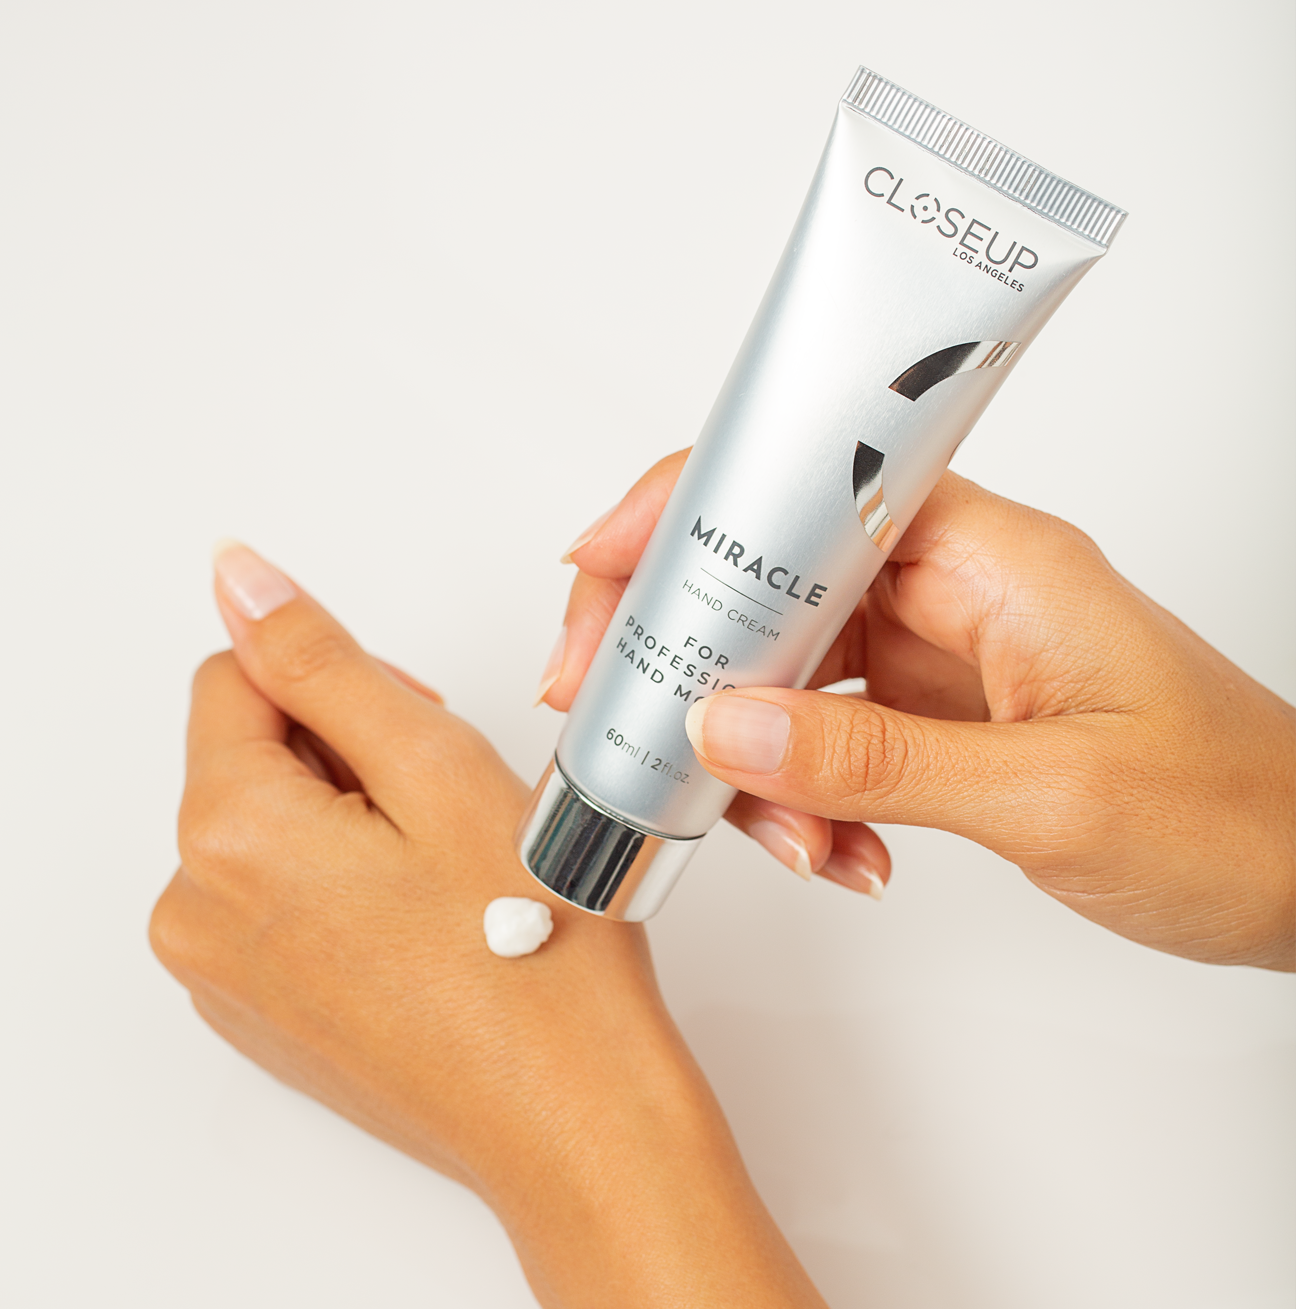 MIRACLE Hand Cream - Hand Cream for Professional Hand Models